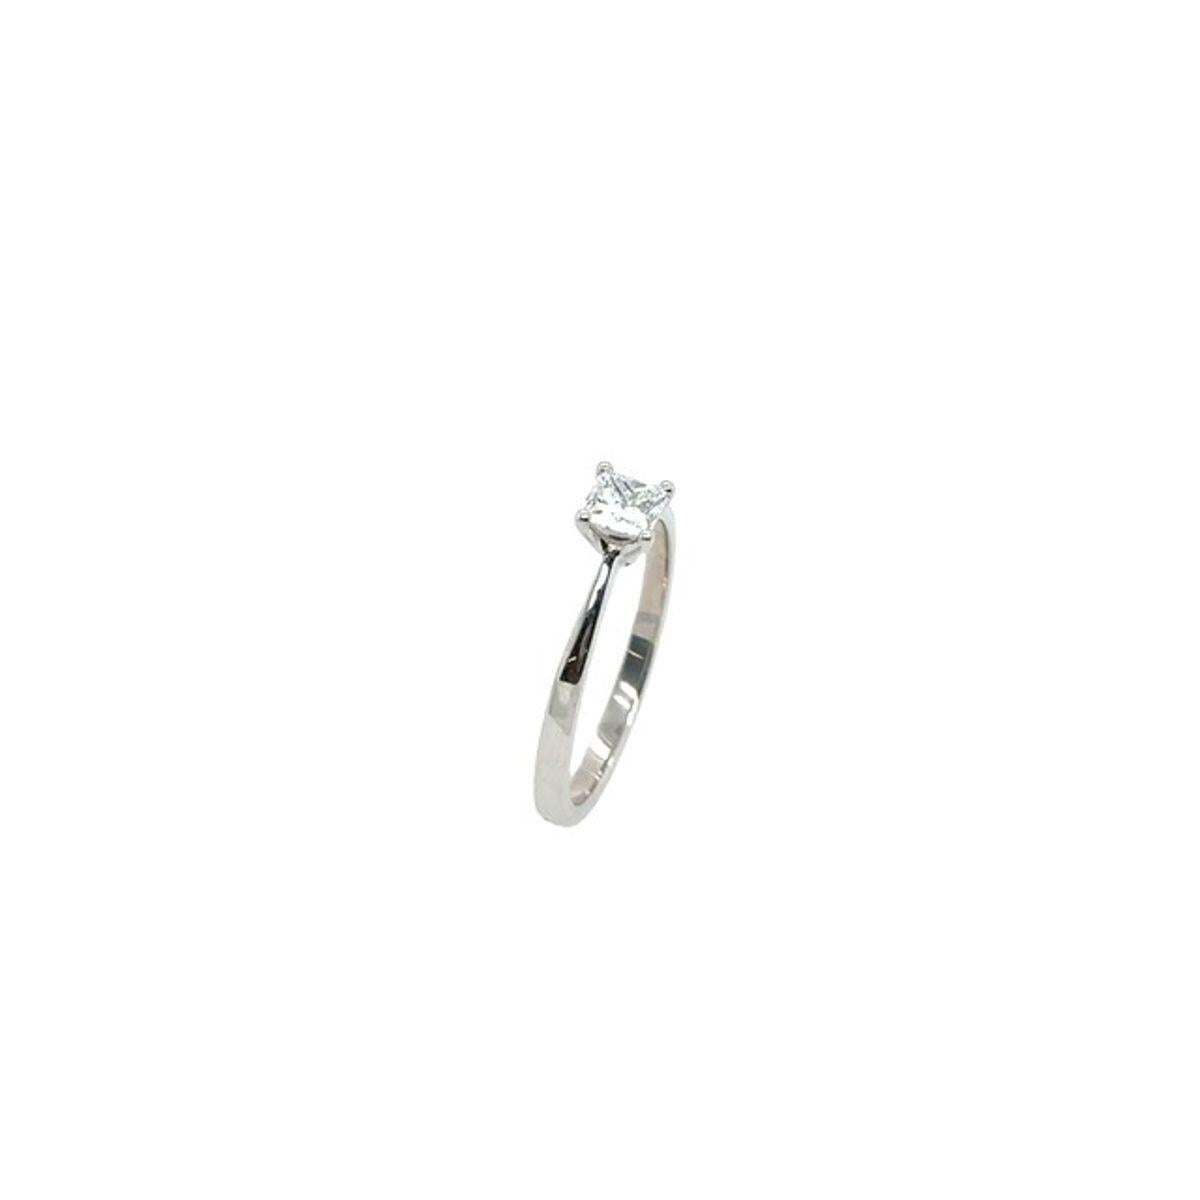 An elegant Diamond ring for your engagement, set with 0.40ct F/VV1 princess cut natural Diamond, set in 18ct White Gold.

Additional Information:
Total Diamond Weight: 0.40ct
Diamond Colour: F
Diamond Clarity: VVS1
Width of Band: 1.90mm
Width of